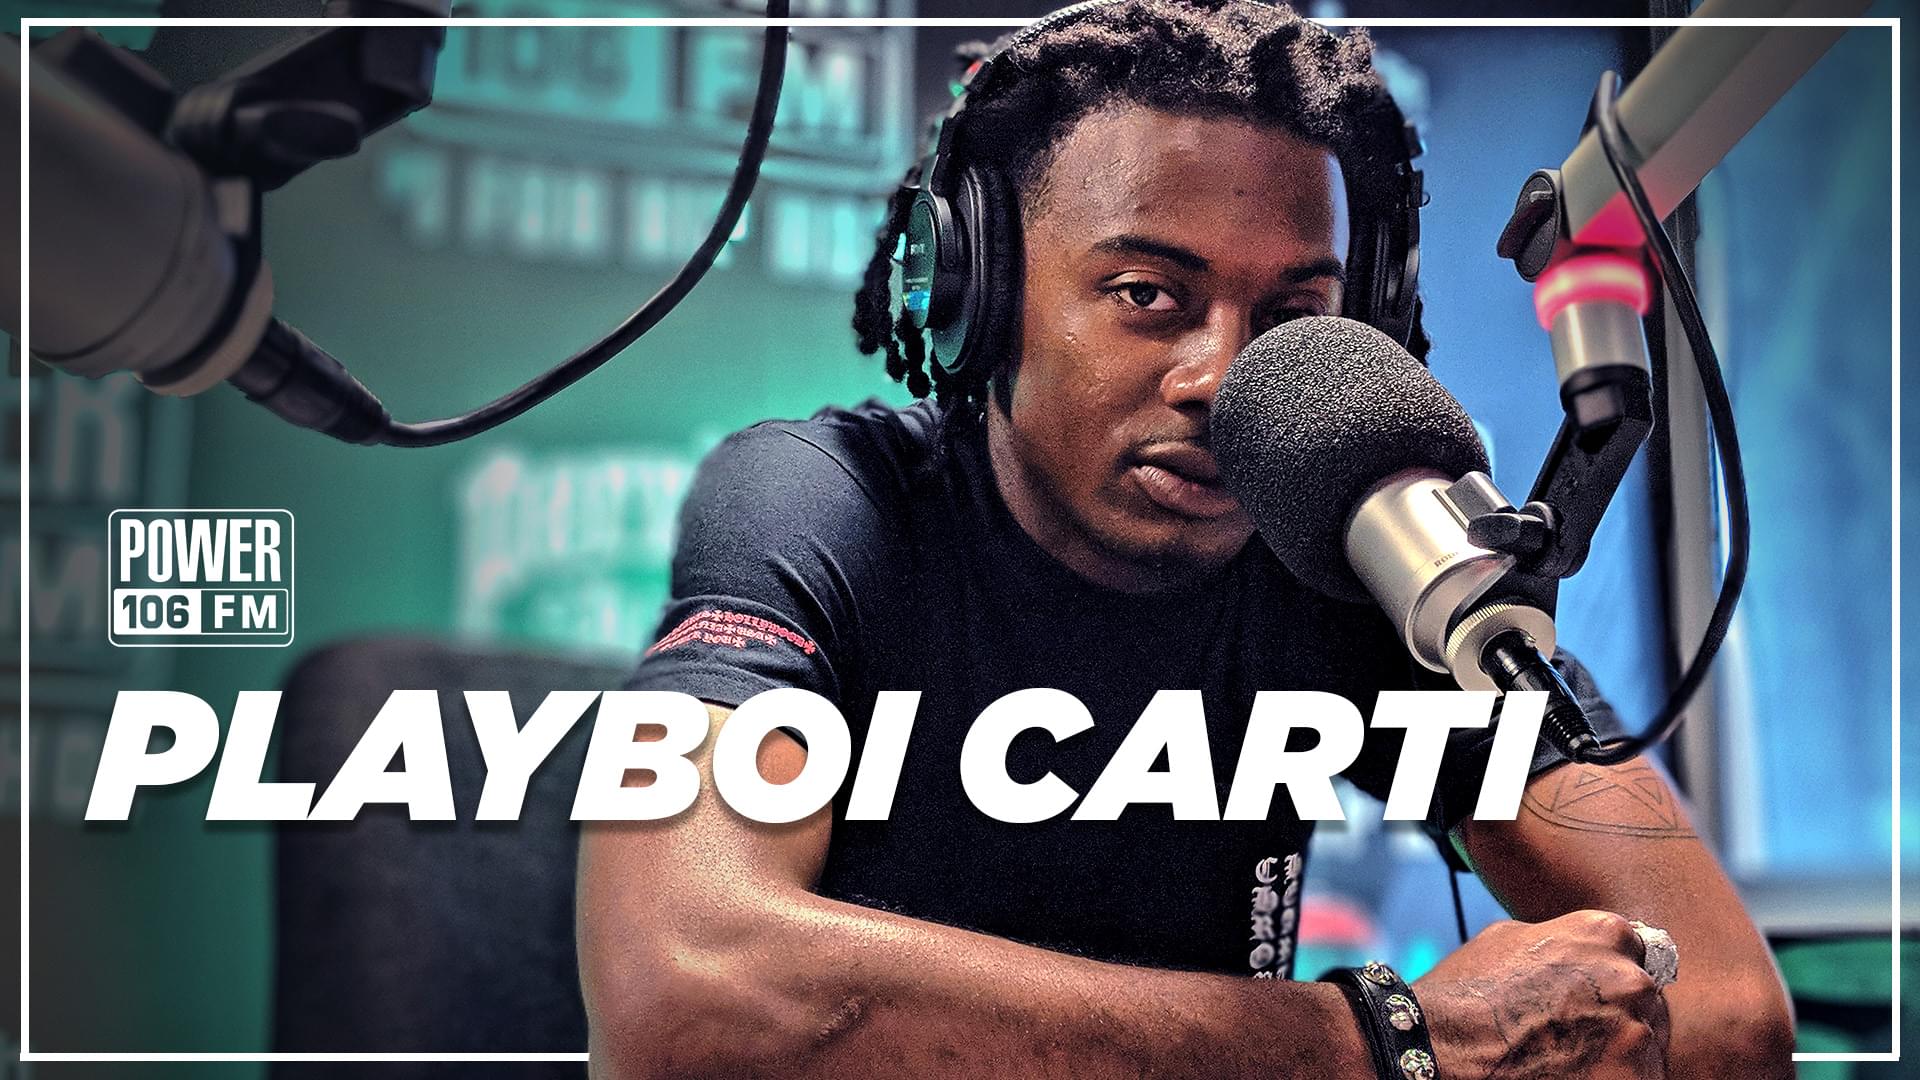 Playboi Carti Talks Unreleased Frank Ocean Collabs, “Die Lit” Album, Going To The Club With His Pops [WATCH]